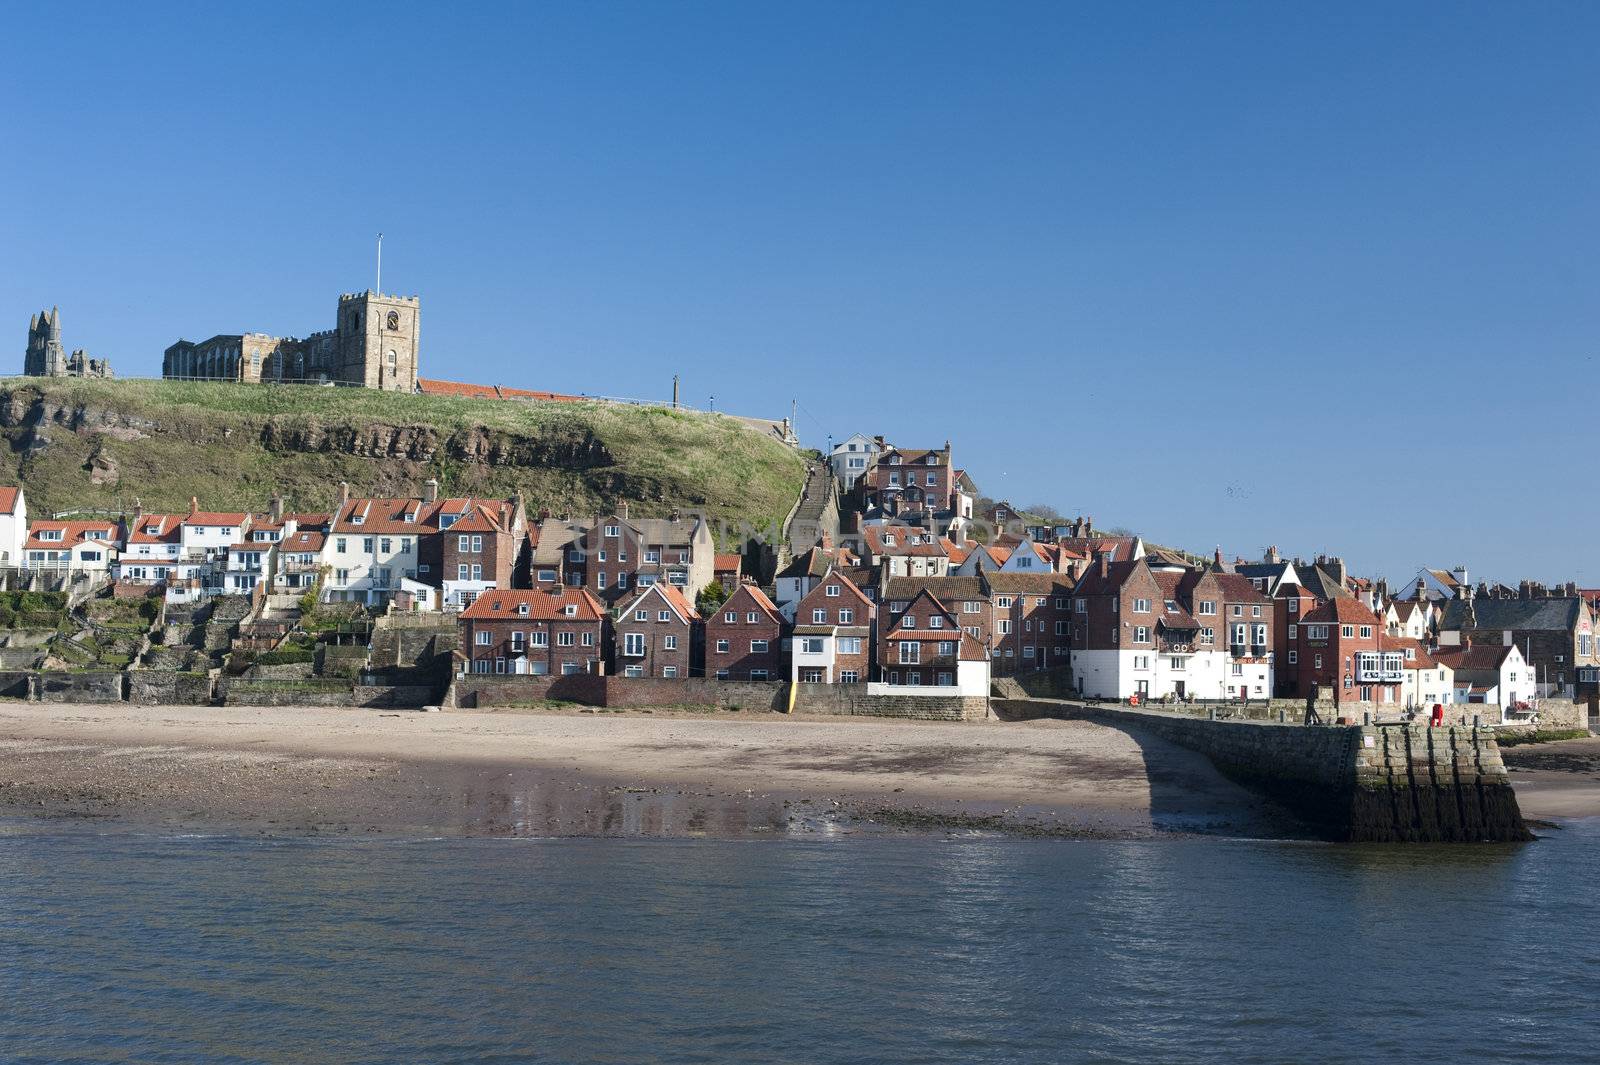 View of the waterfront and houses in Whitby in North Yorkshire with Tate hill in the background